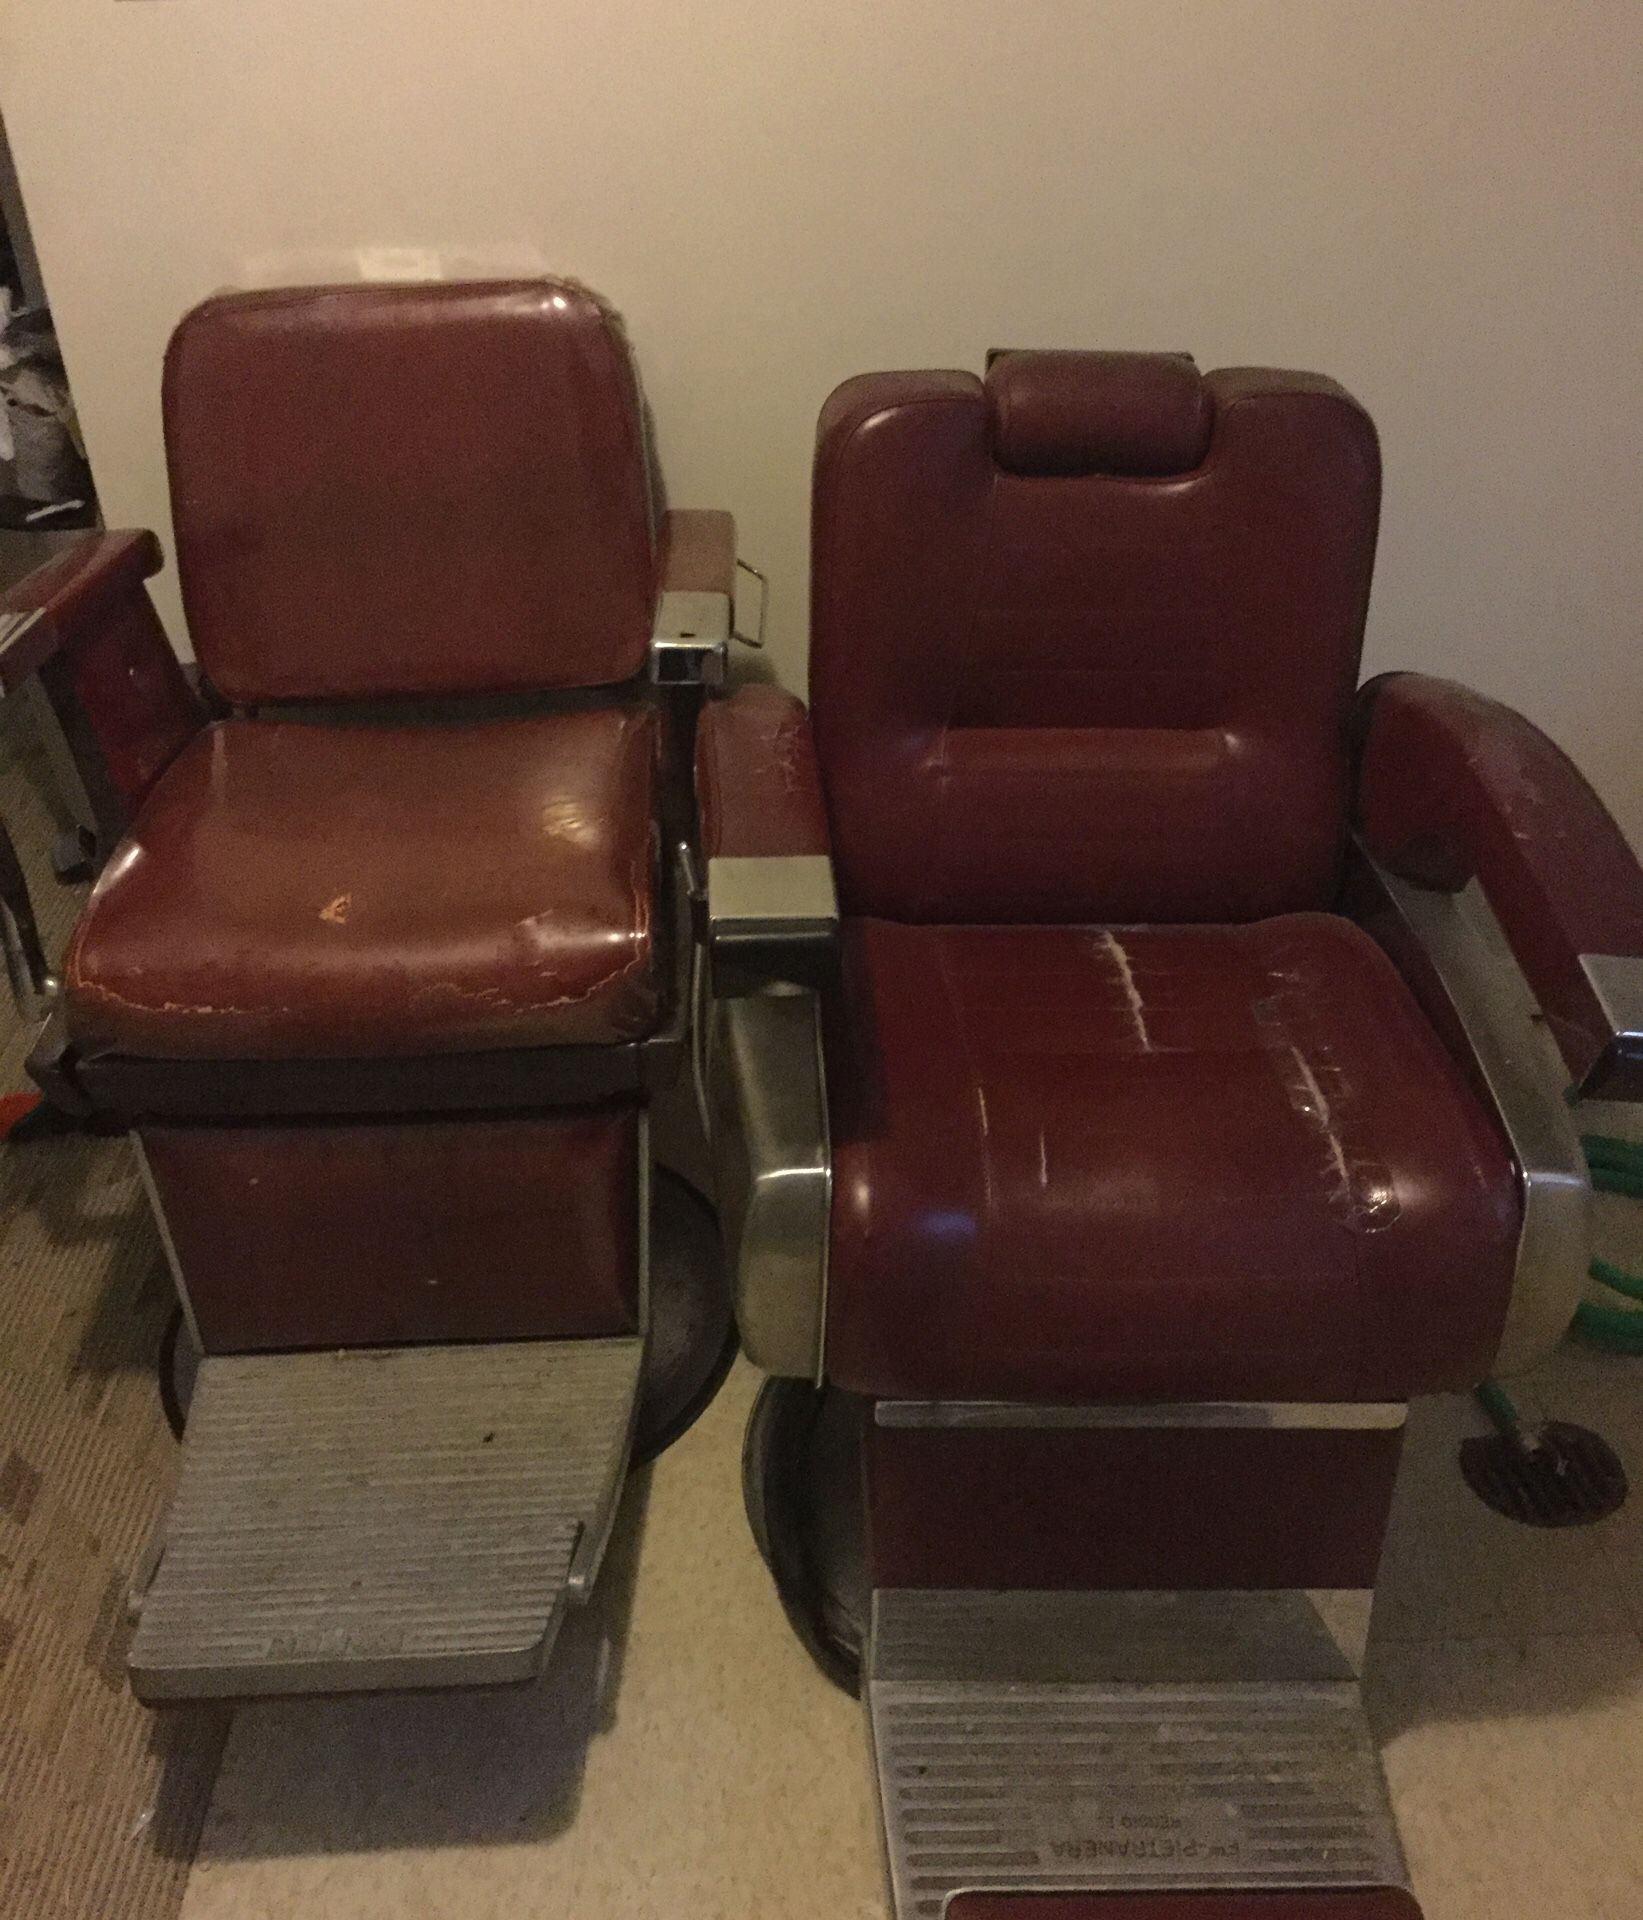 Antique barber chairs